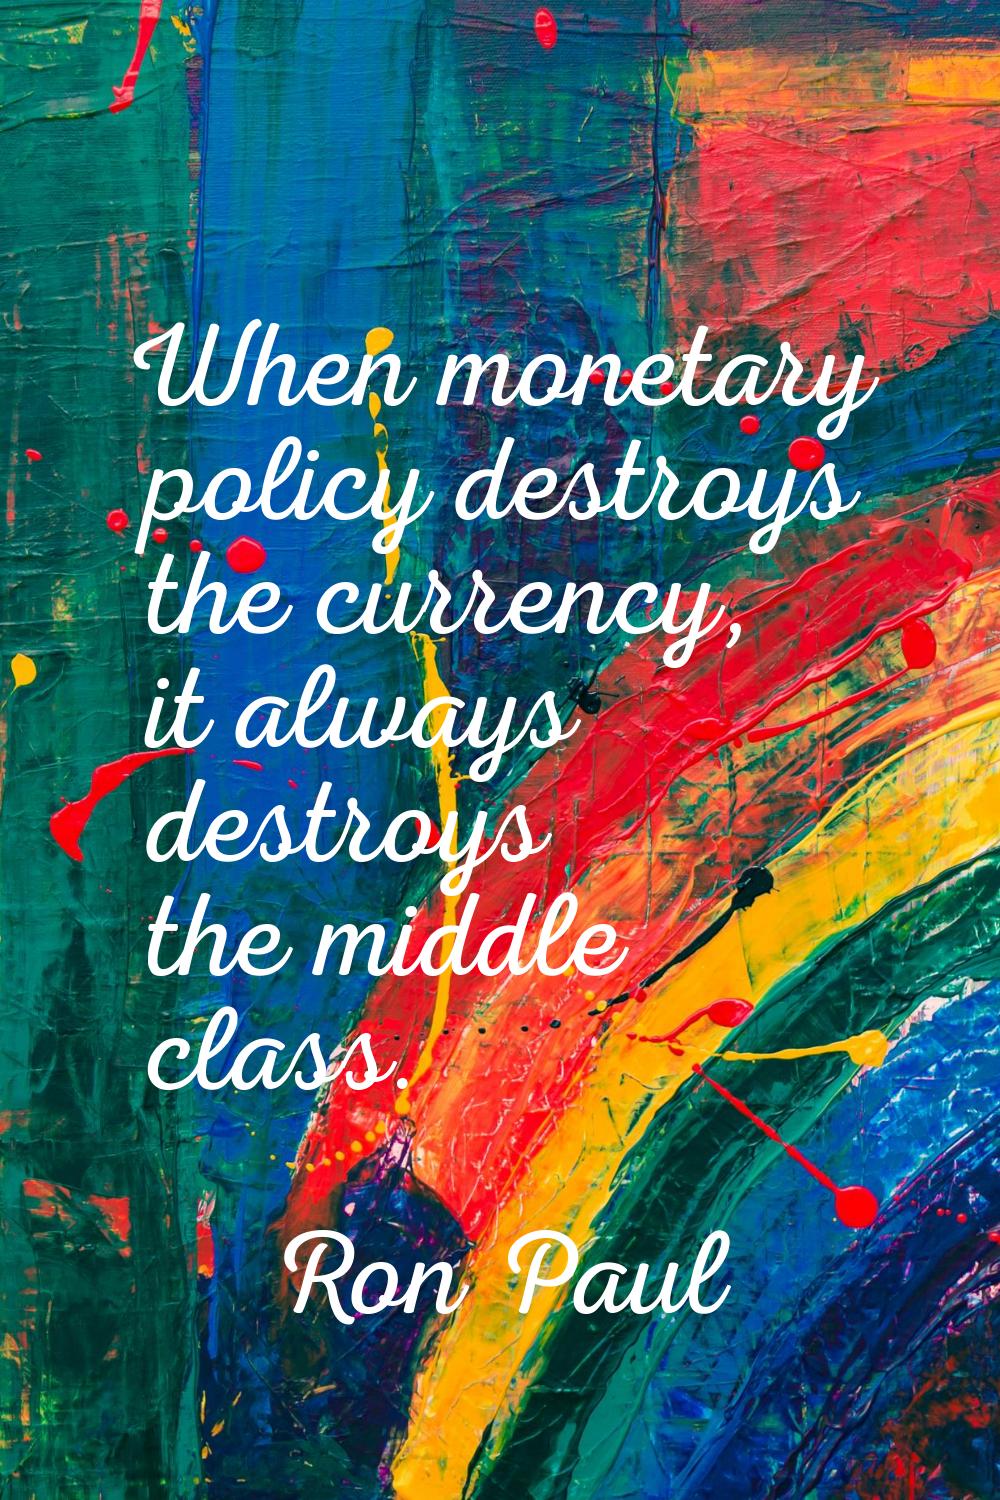 When monetary policy destroys the currency, it always destroys the middle class.